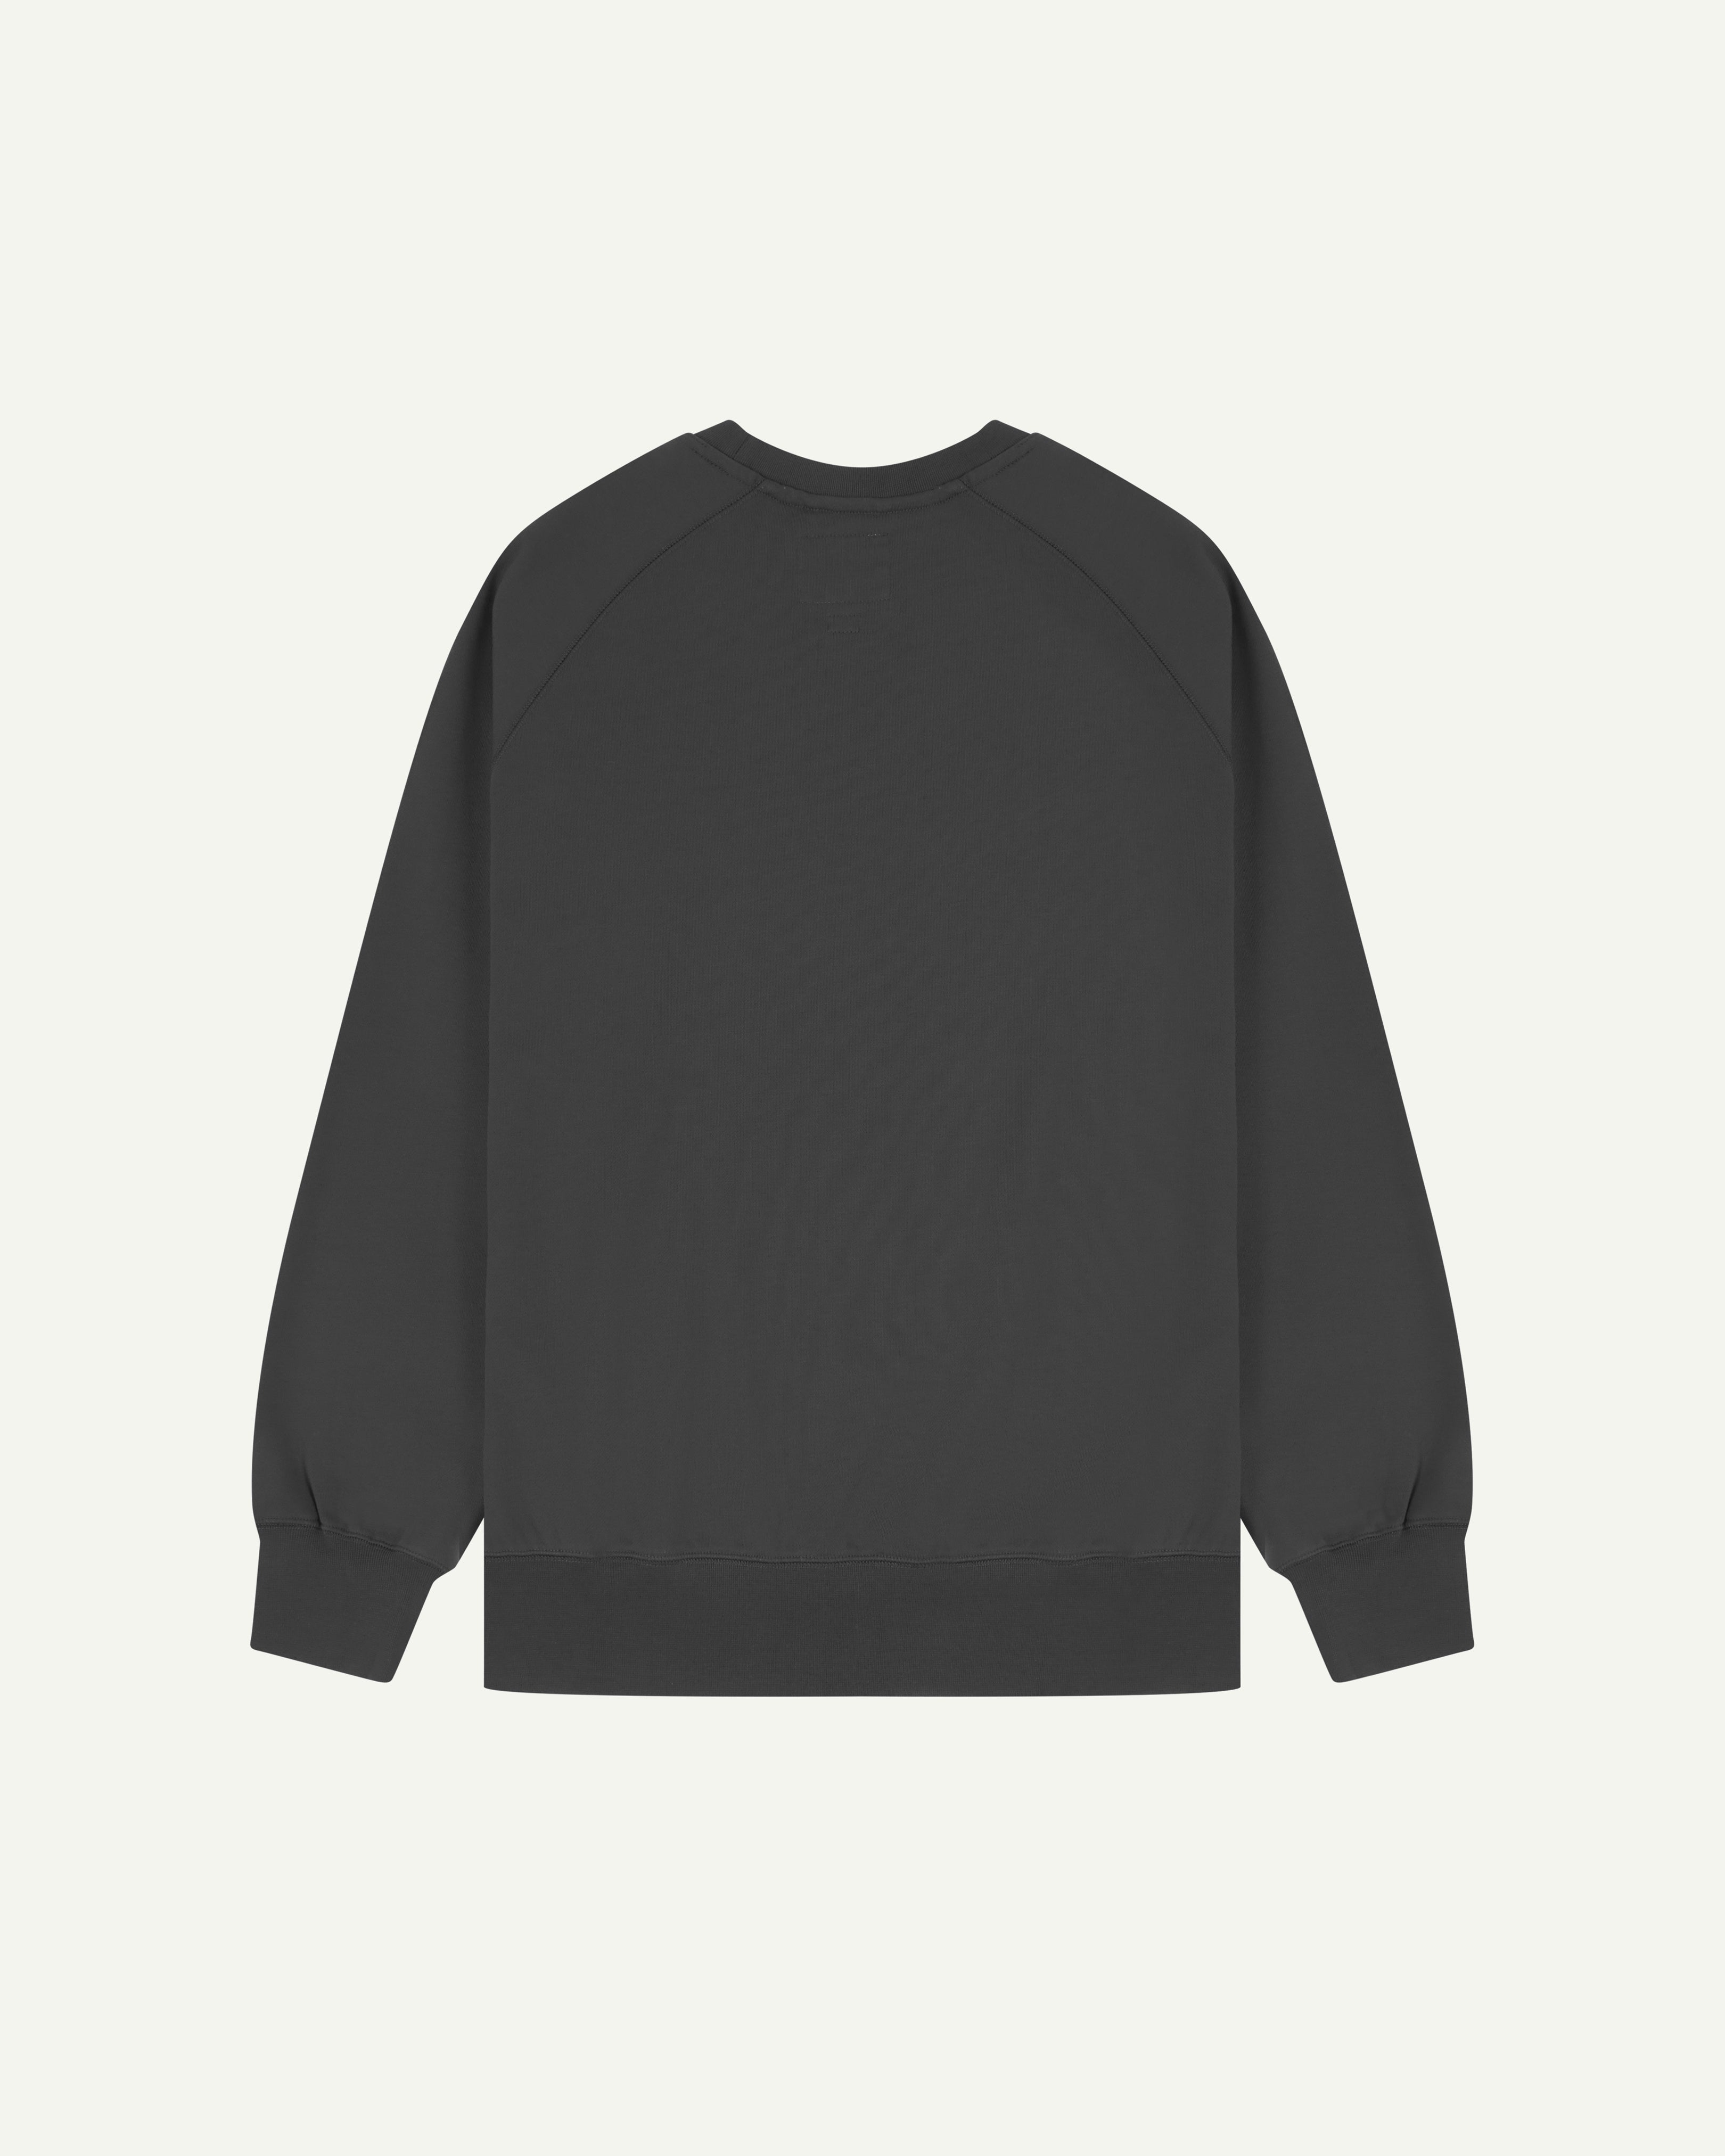 #7005 Faded Black Cotton Sweater | USKEES Organic Apparel